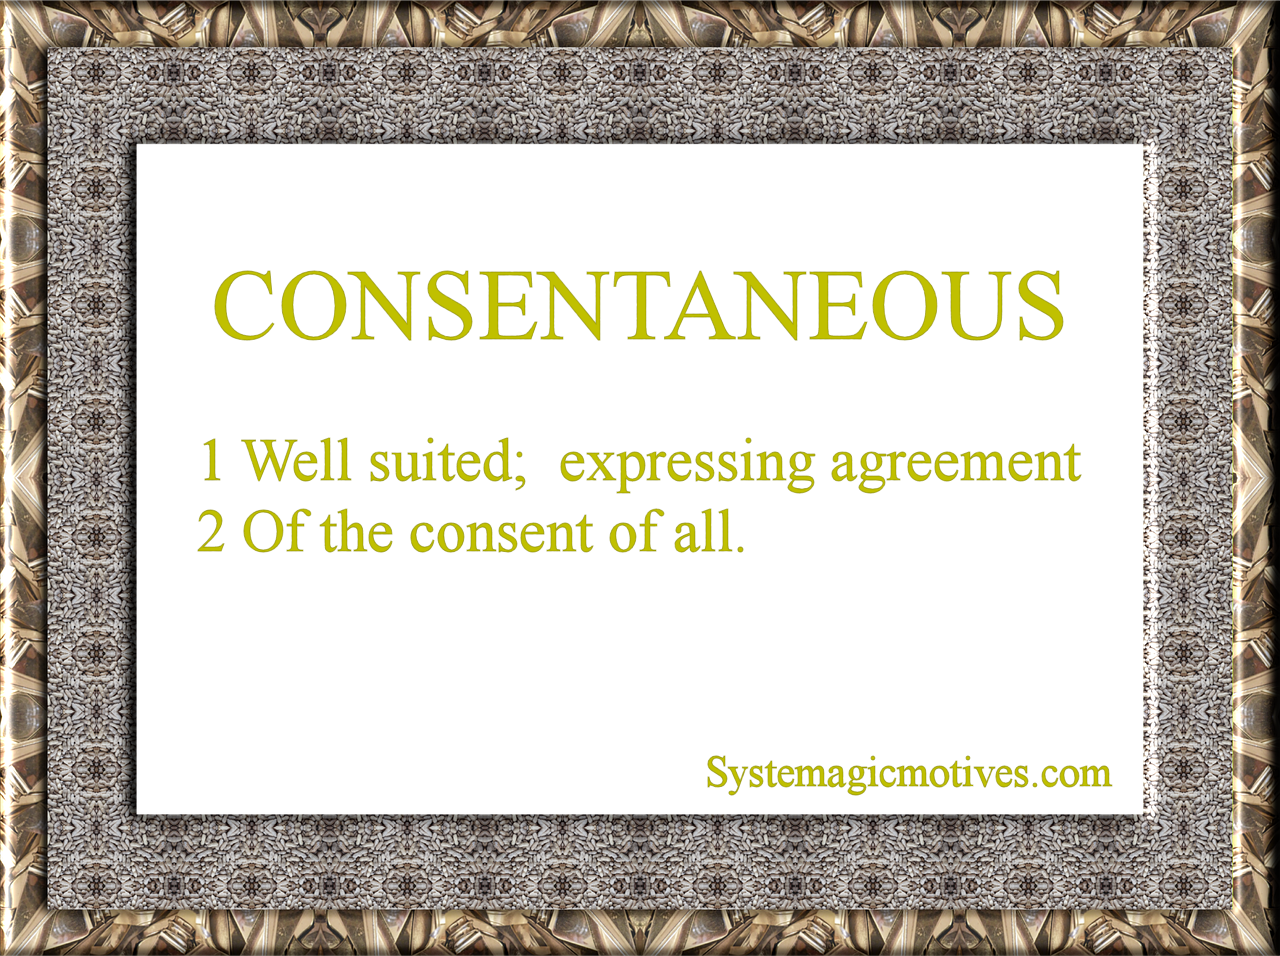 The Definition of Consentaneous